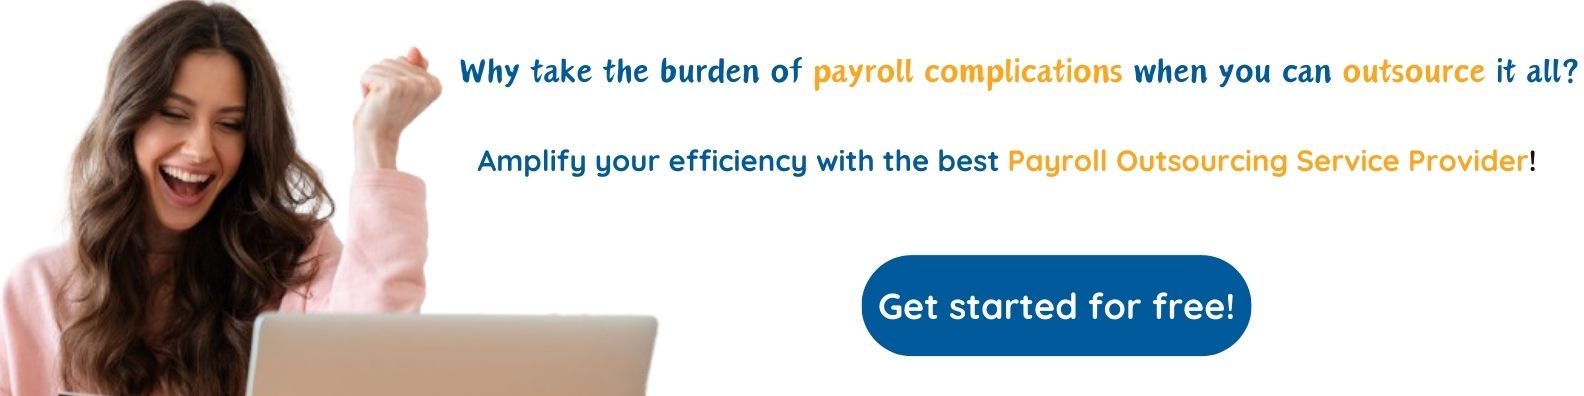 Payroll outsourcing